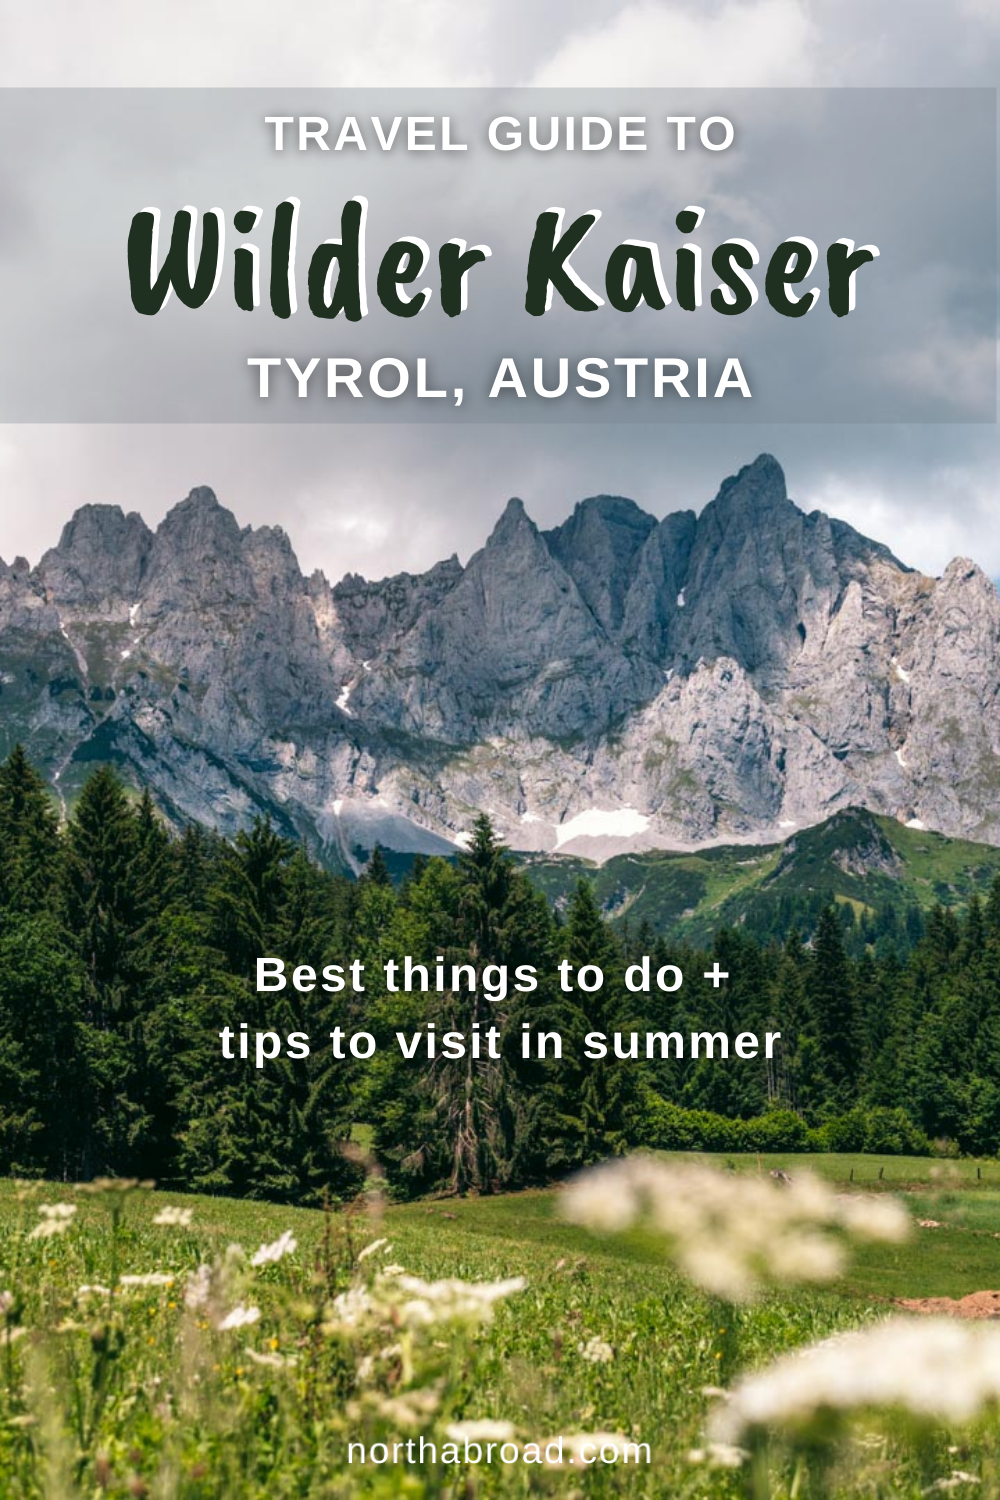 Everything you need to know about Wilder Kaiser in Tyrol, Austria including what to do, when to visit and where to stay